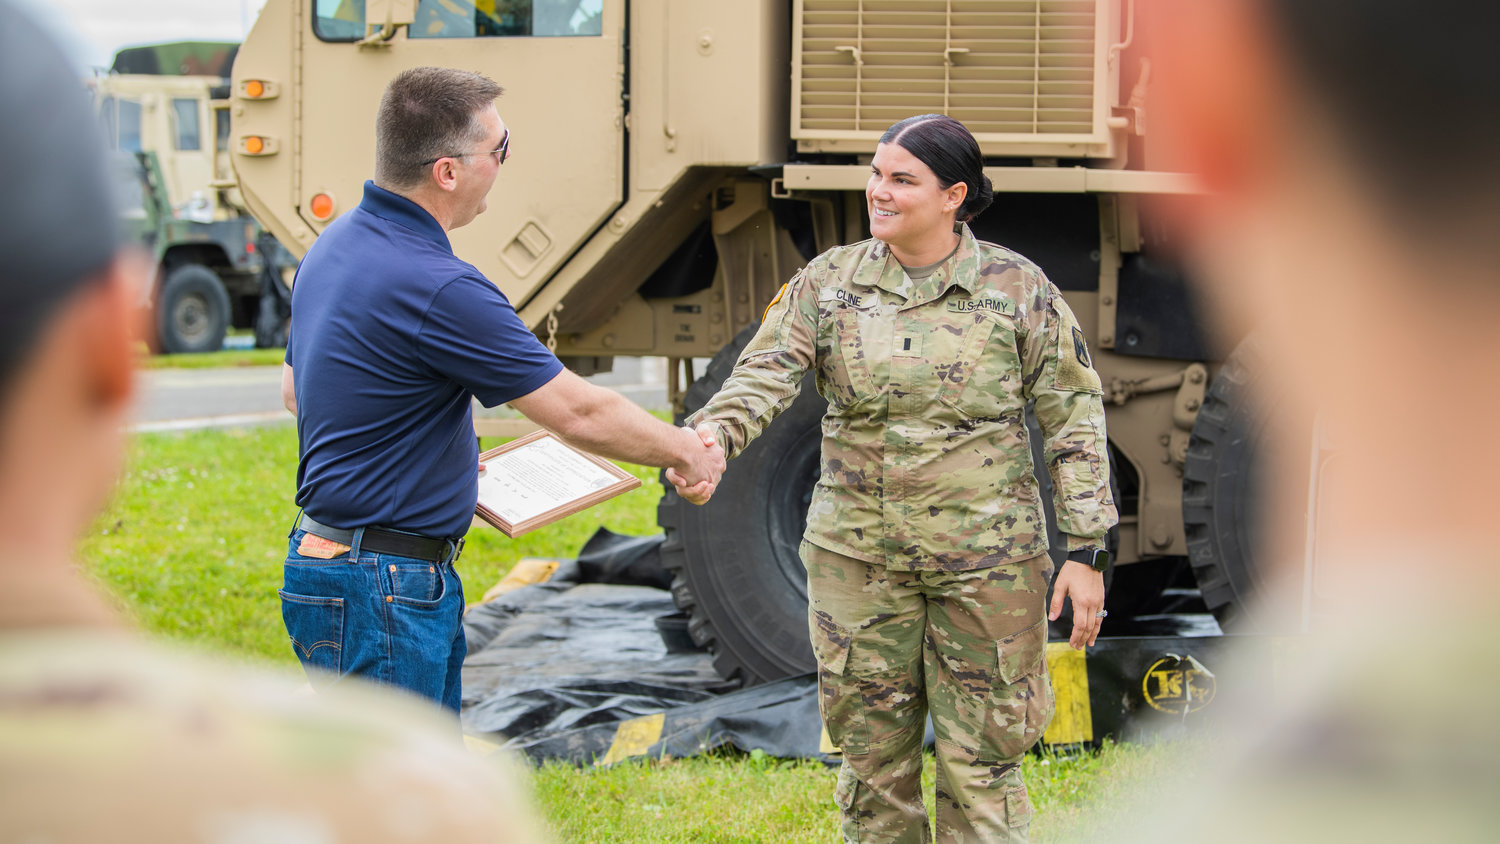 Brandon Rakes is recognized with a certificate of appreciation from Apollo Company as he shakes hands with United States Army First Lieutenant Savannah Cline at the Chehalis-Centralia Airport during a military training exercise on Wednesday, June 22 in Chehalis.